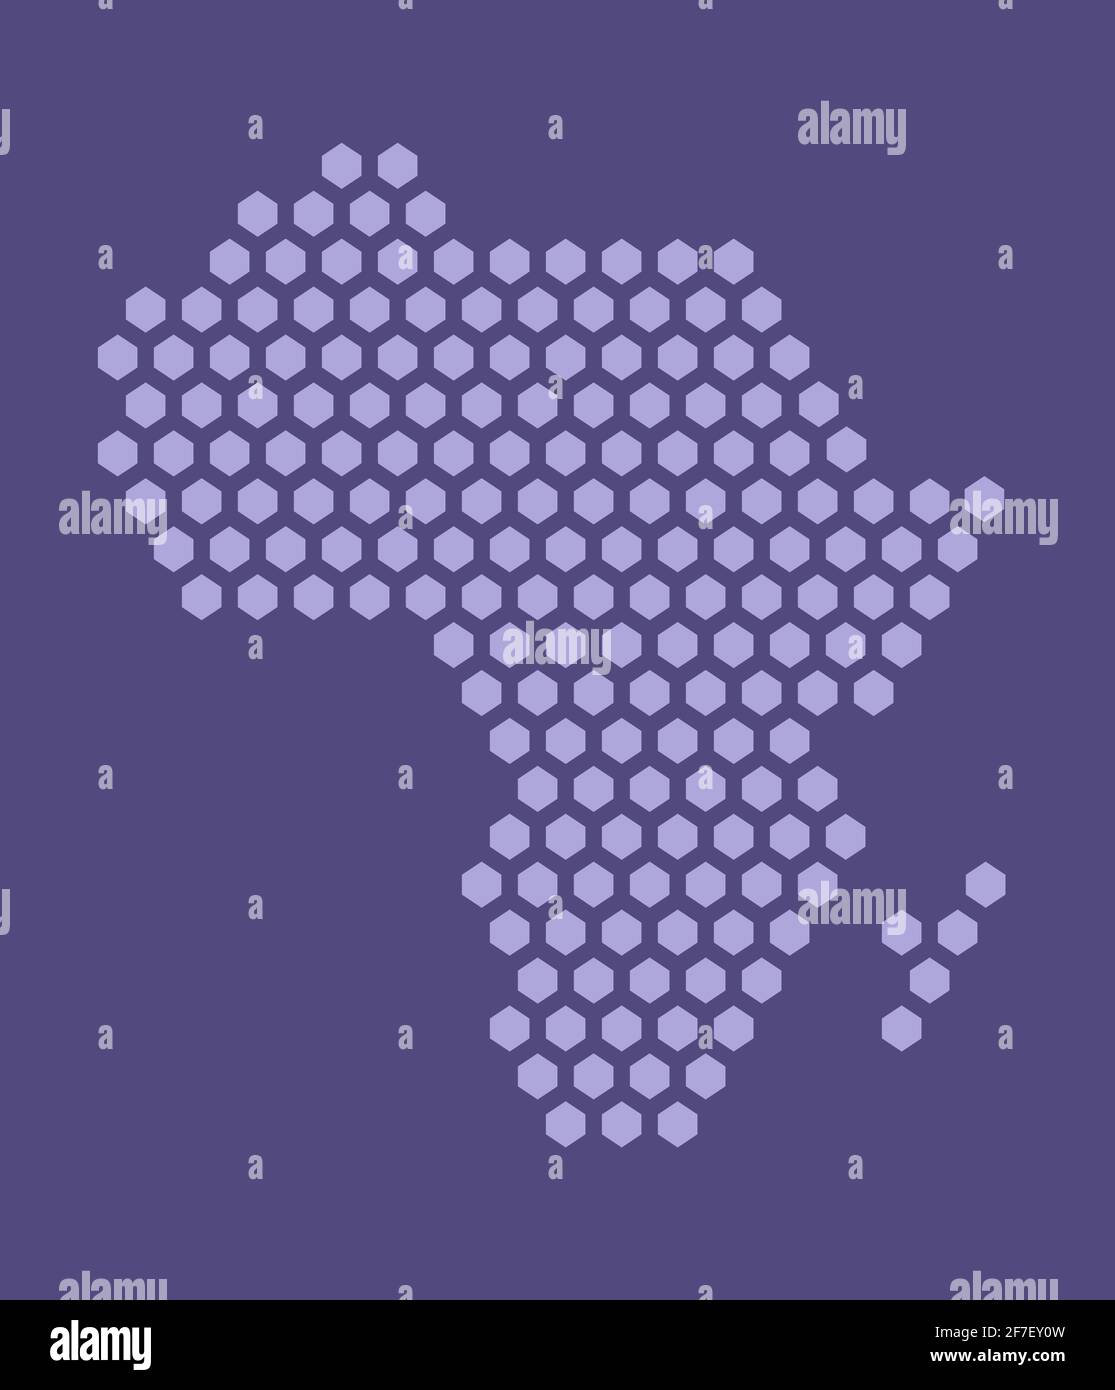 Purple hexagonal pixel map of Africa. Vector illustration African continent hexagon map dotted mosaic. Administrative border, land composition. Stock Vector